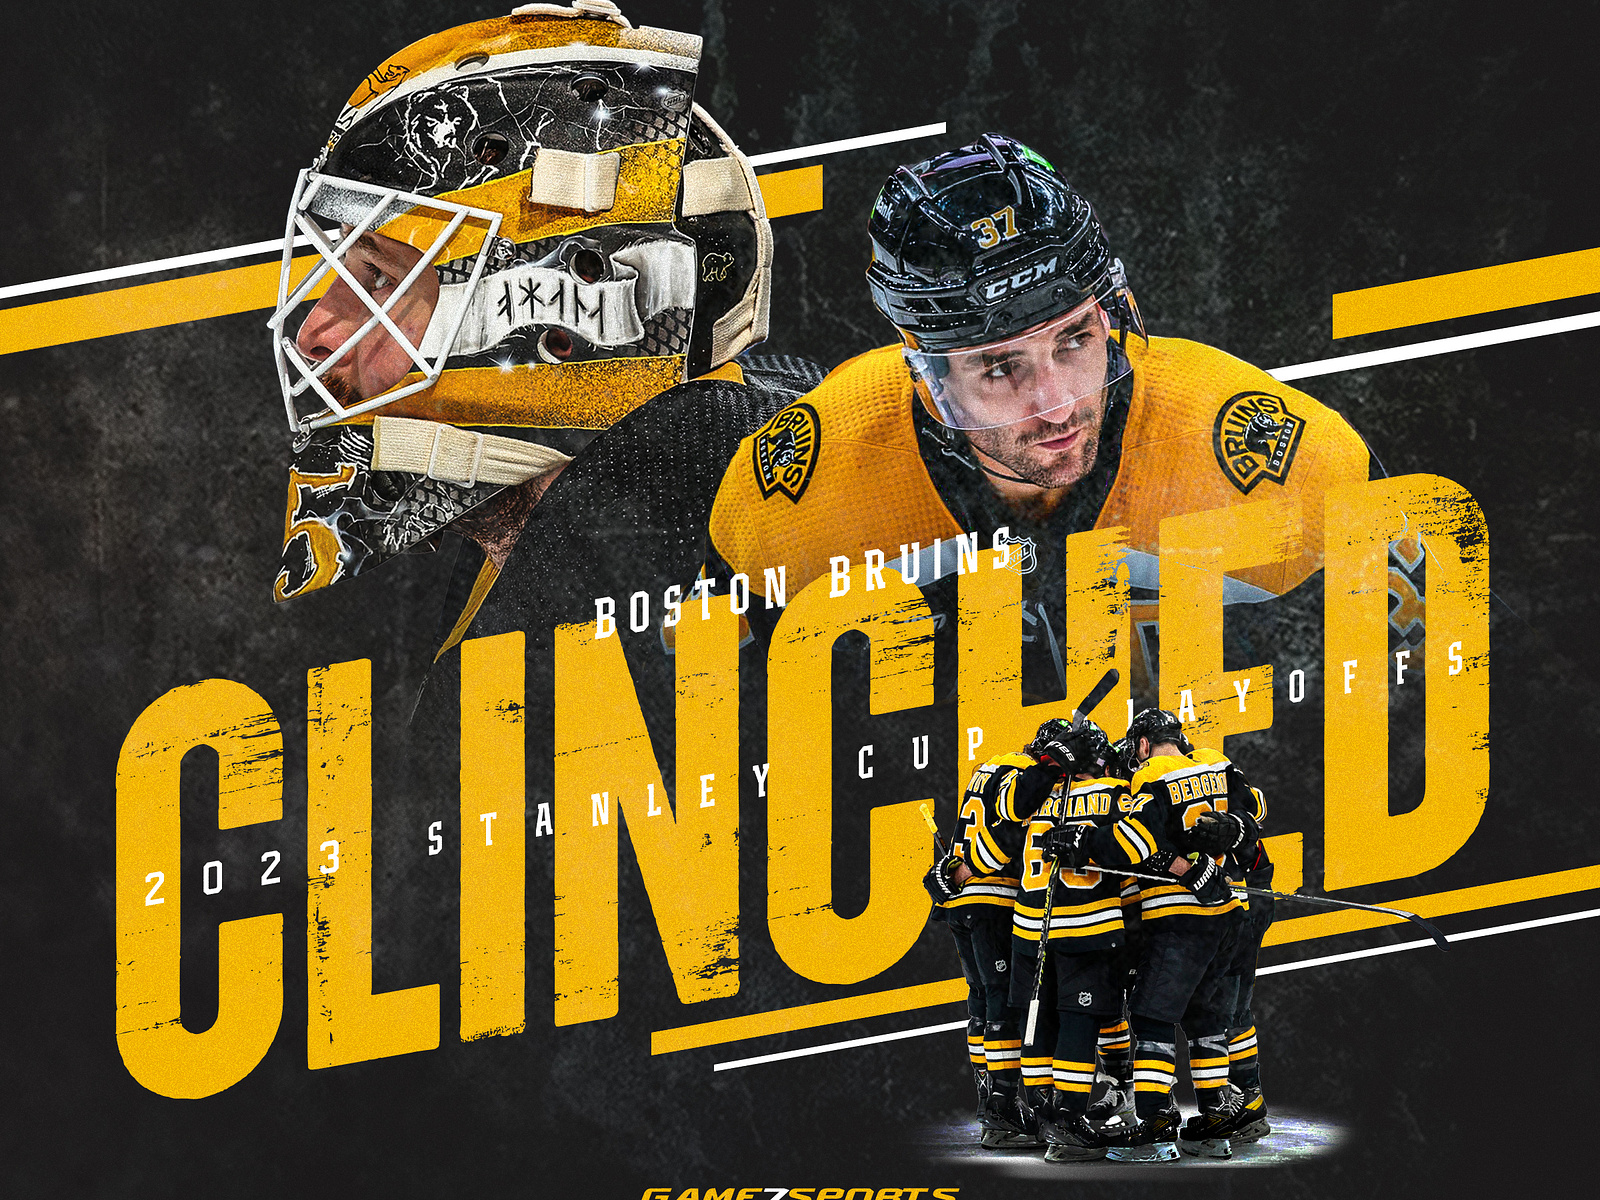 Boston Bruins Playoffs Clinched Artwork by Handsome Rob Media on Dribbble